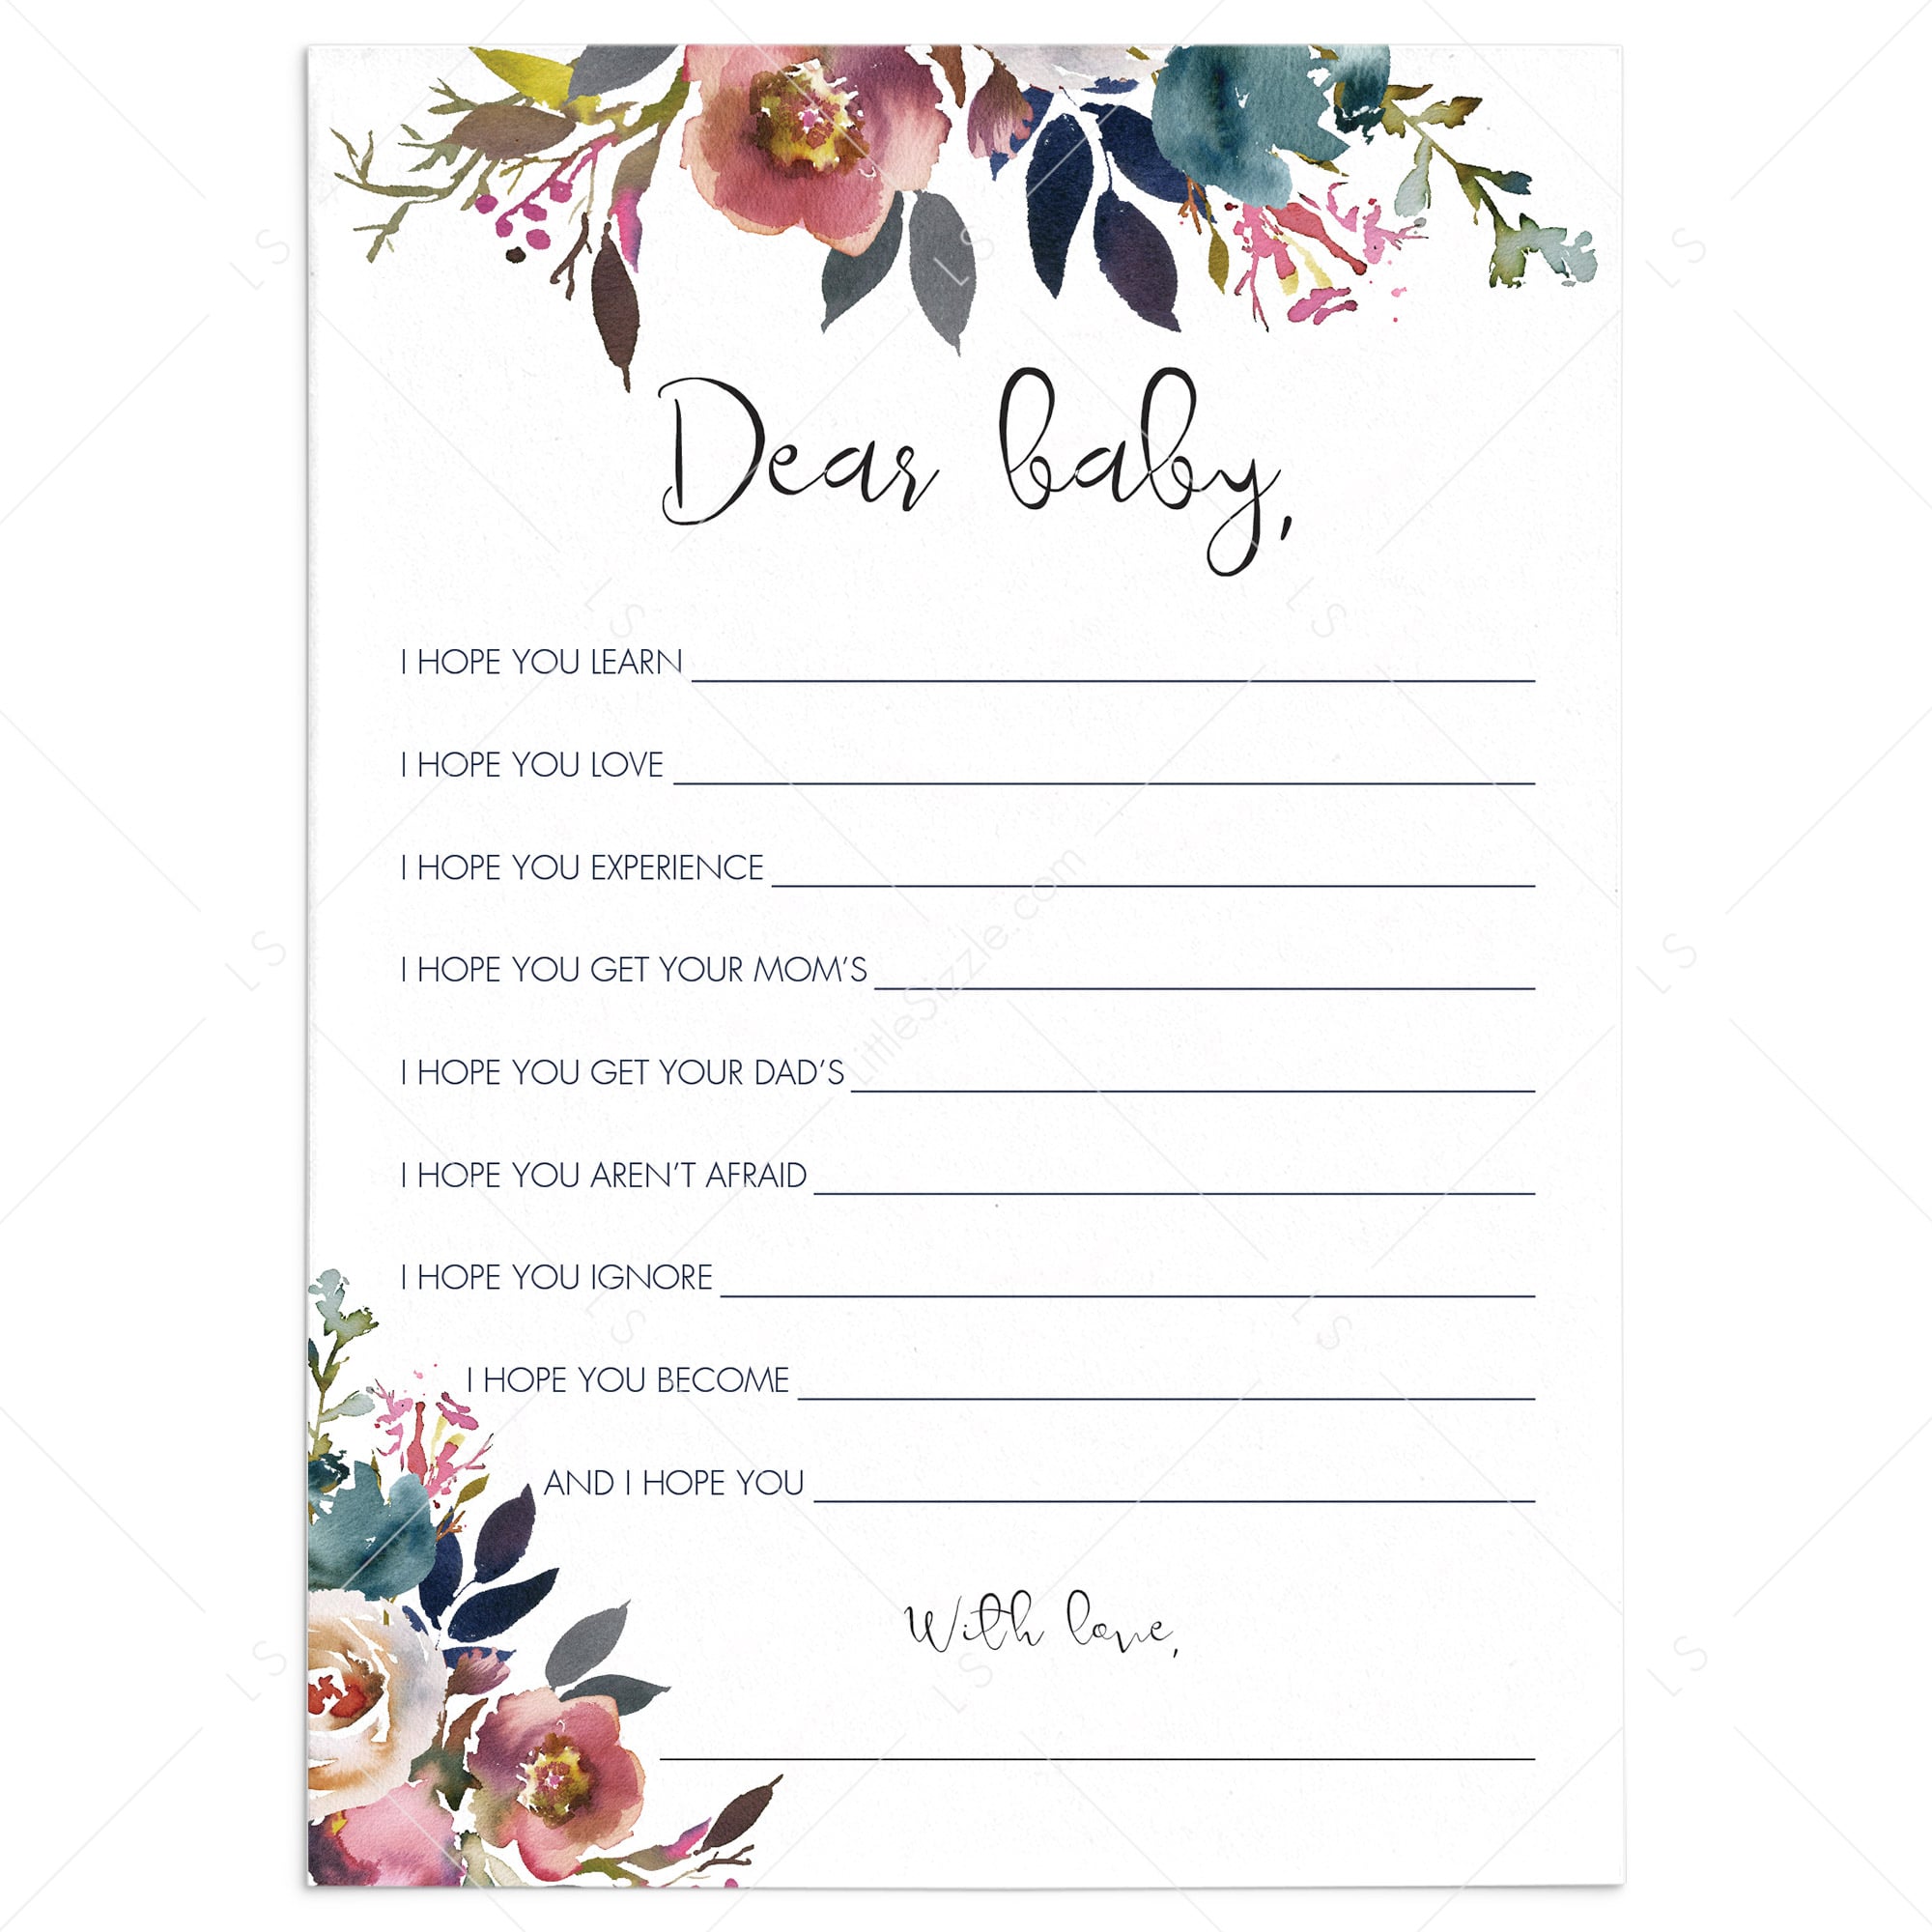 Burgundy baby shower floral dear baby wishes printable